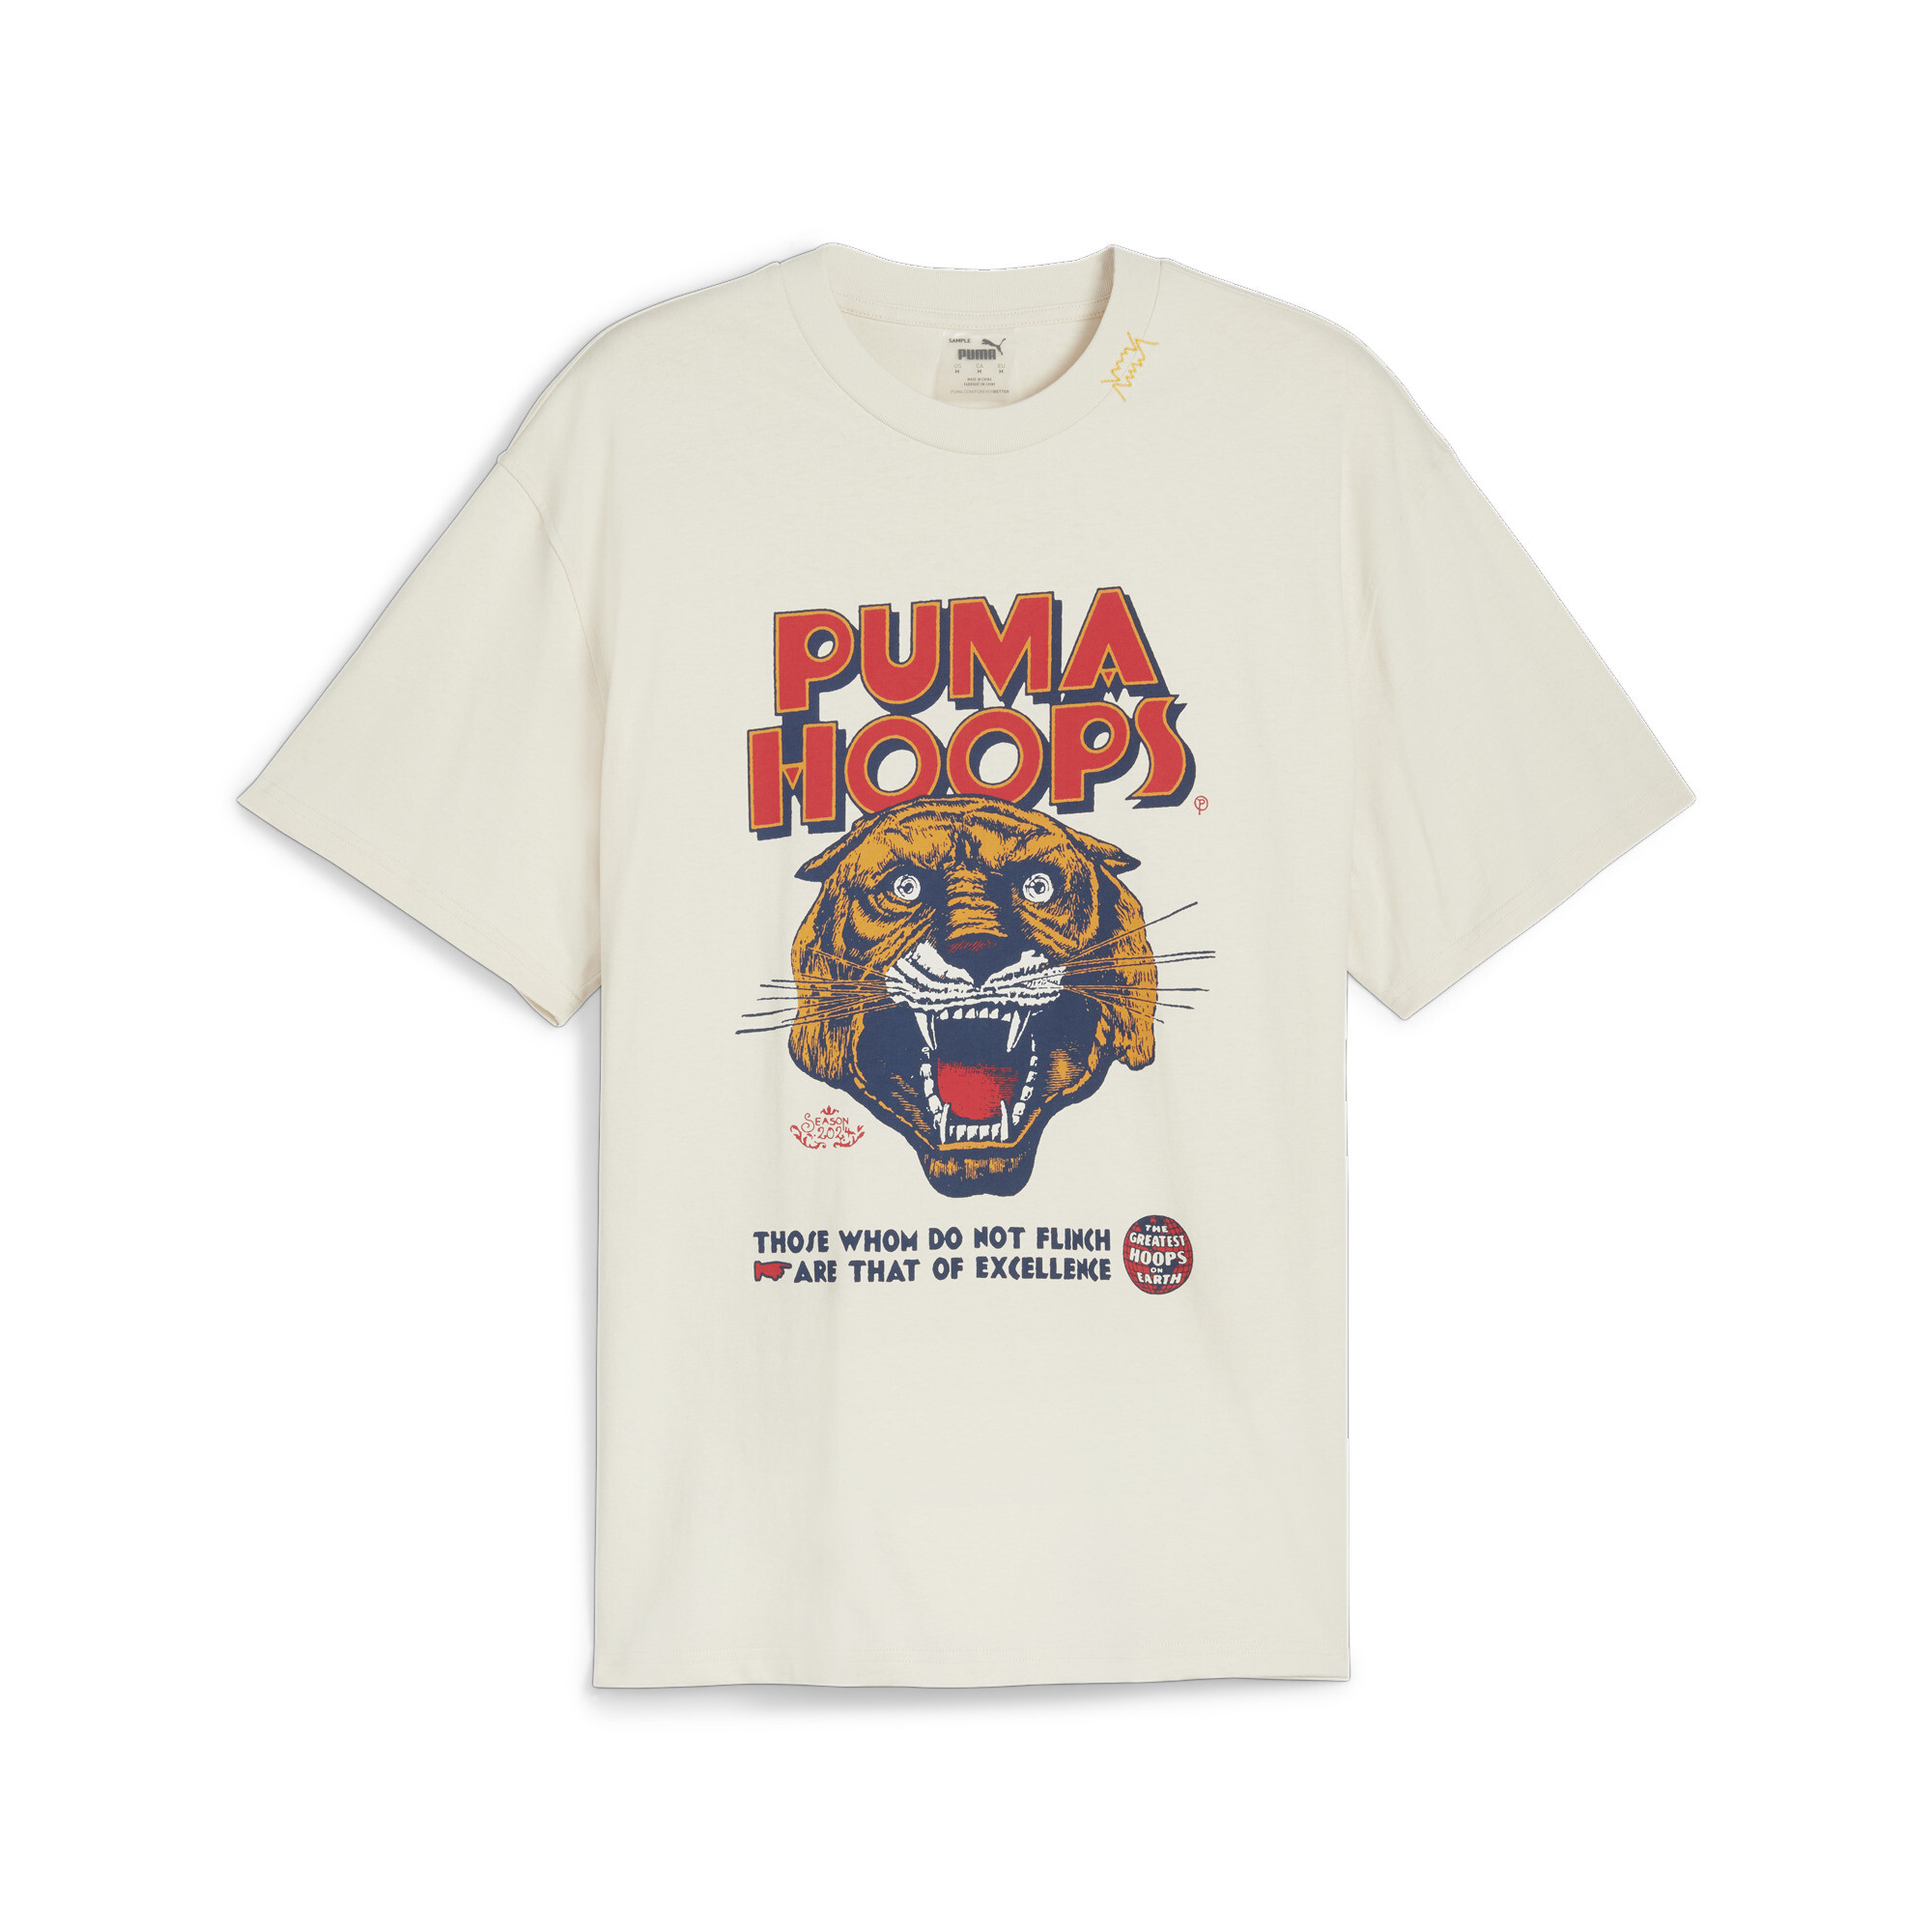 Men's PUMA HOOPS Showtime T-Shirt In White, Size XS